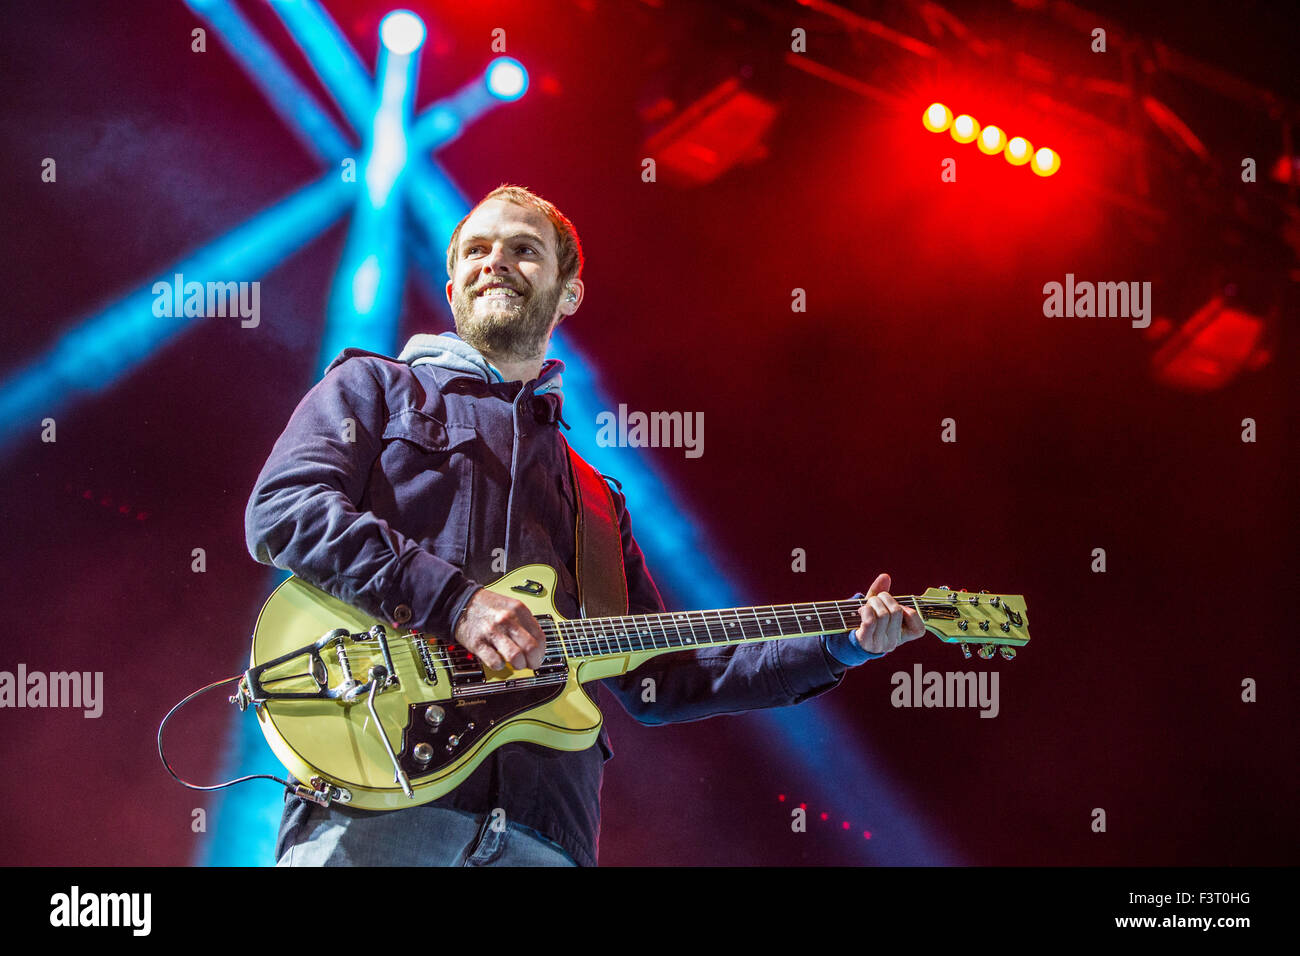 Munich, Germany. 11th Oct, 2015. Peter Brugger, singer of the band 'Sportfreunde Stiller' performs during the free 'Thank You' concert for volunteers who lend their support in the on-going refugee situation in Munich, Germany, 11 October 2015. Photo: Marc Mueller/dpa/Alamy Live News Stock Photo